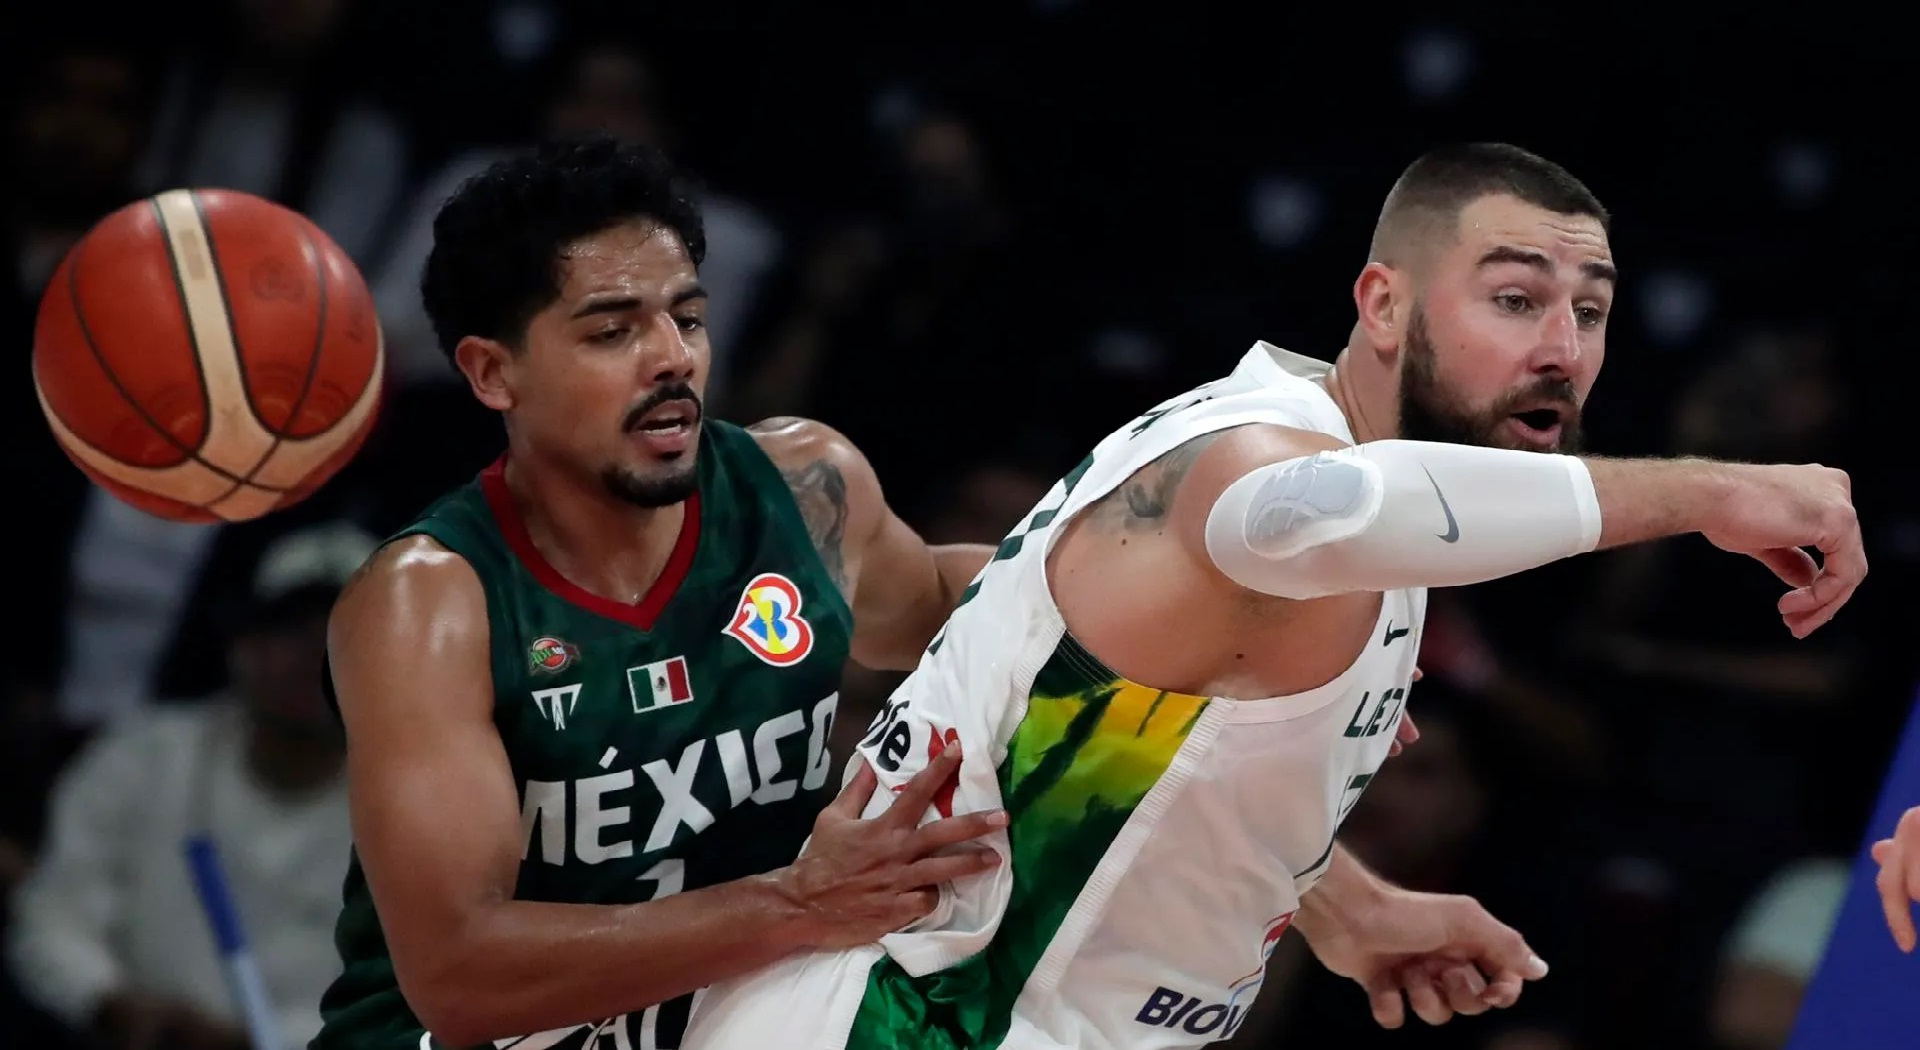 Mexico says goodbye to the World Cup dream after losing to Lithuania